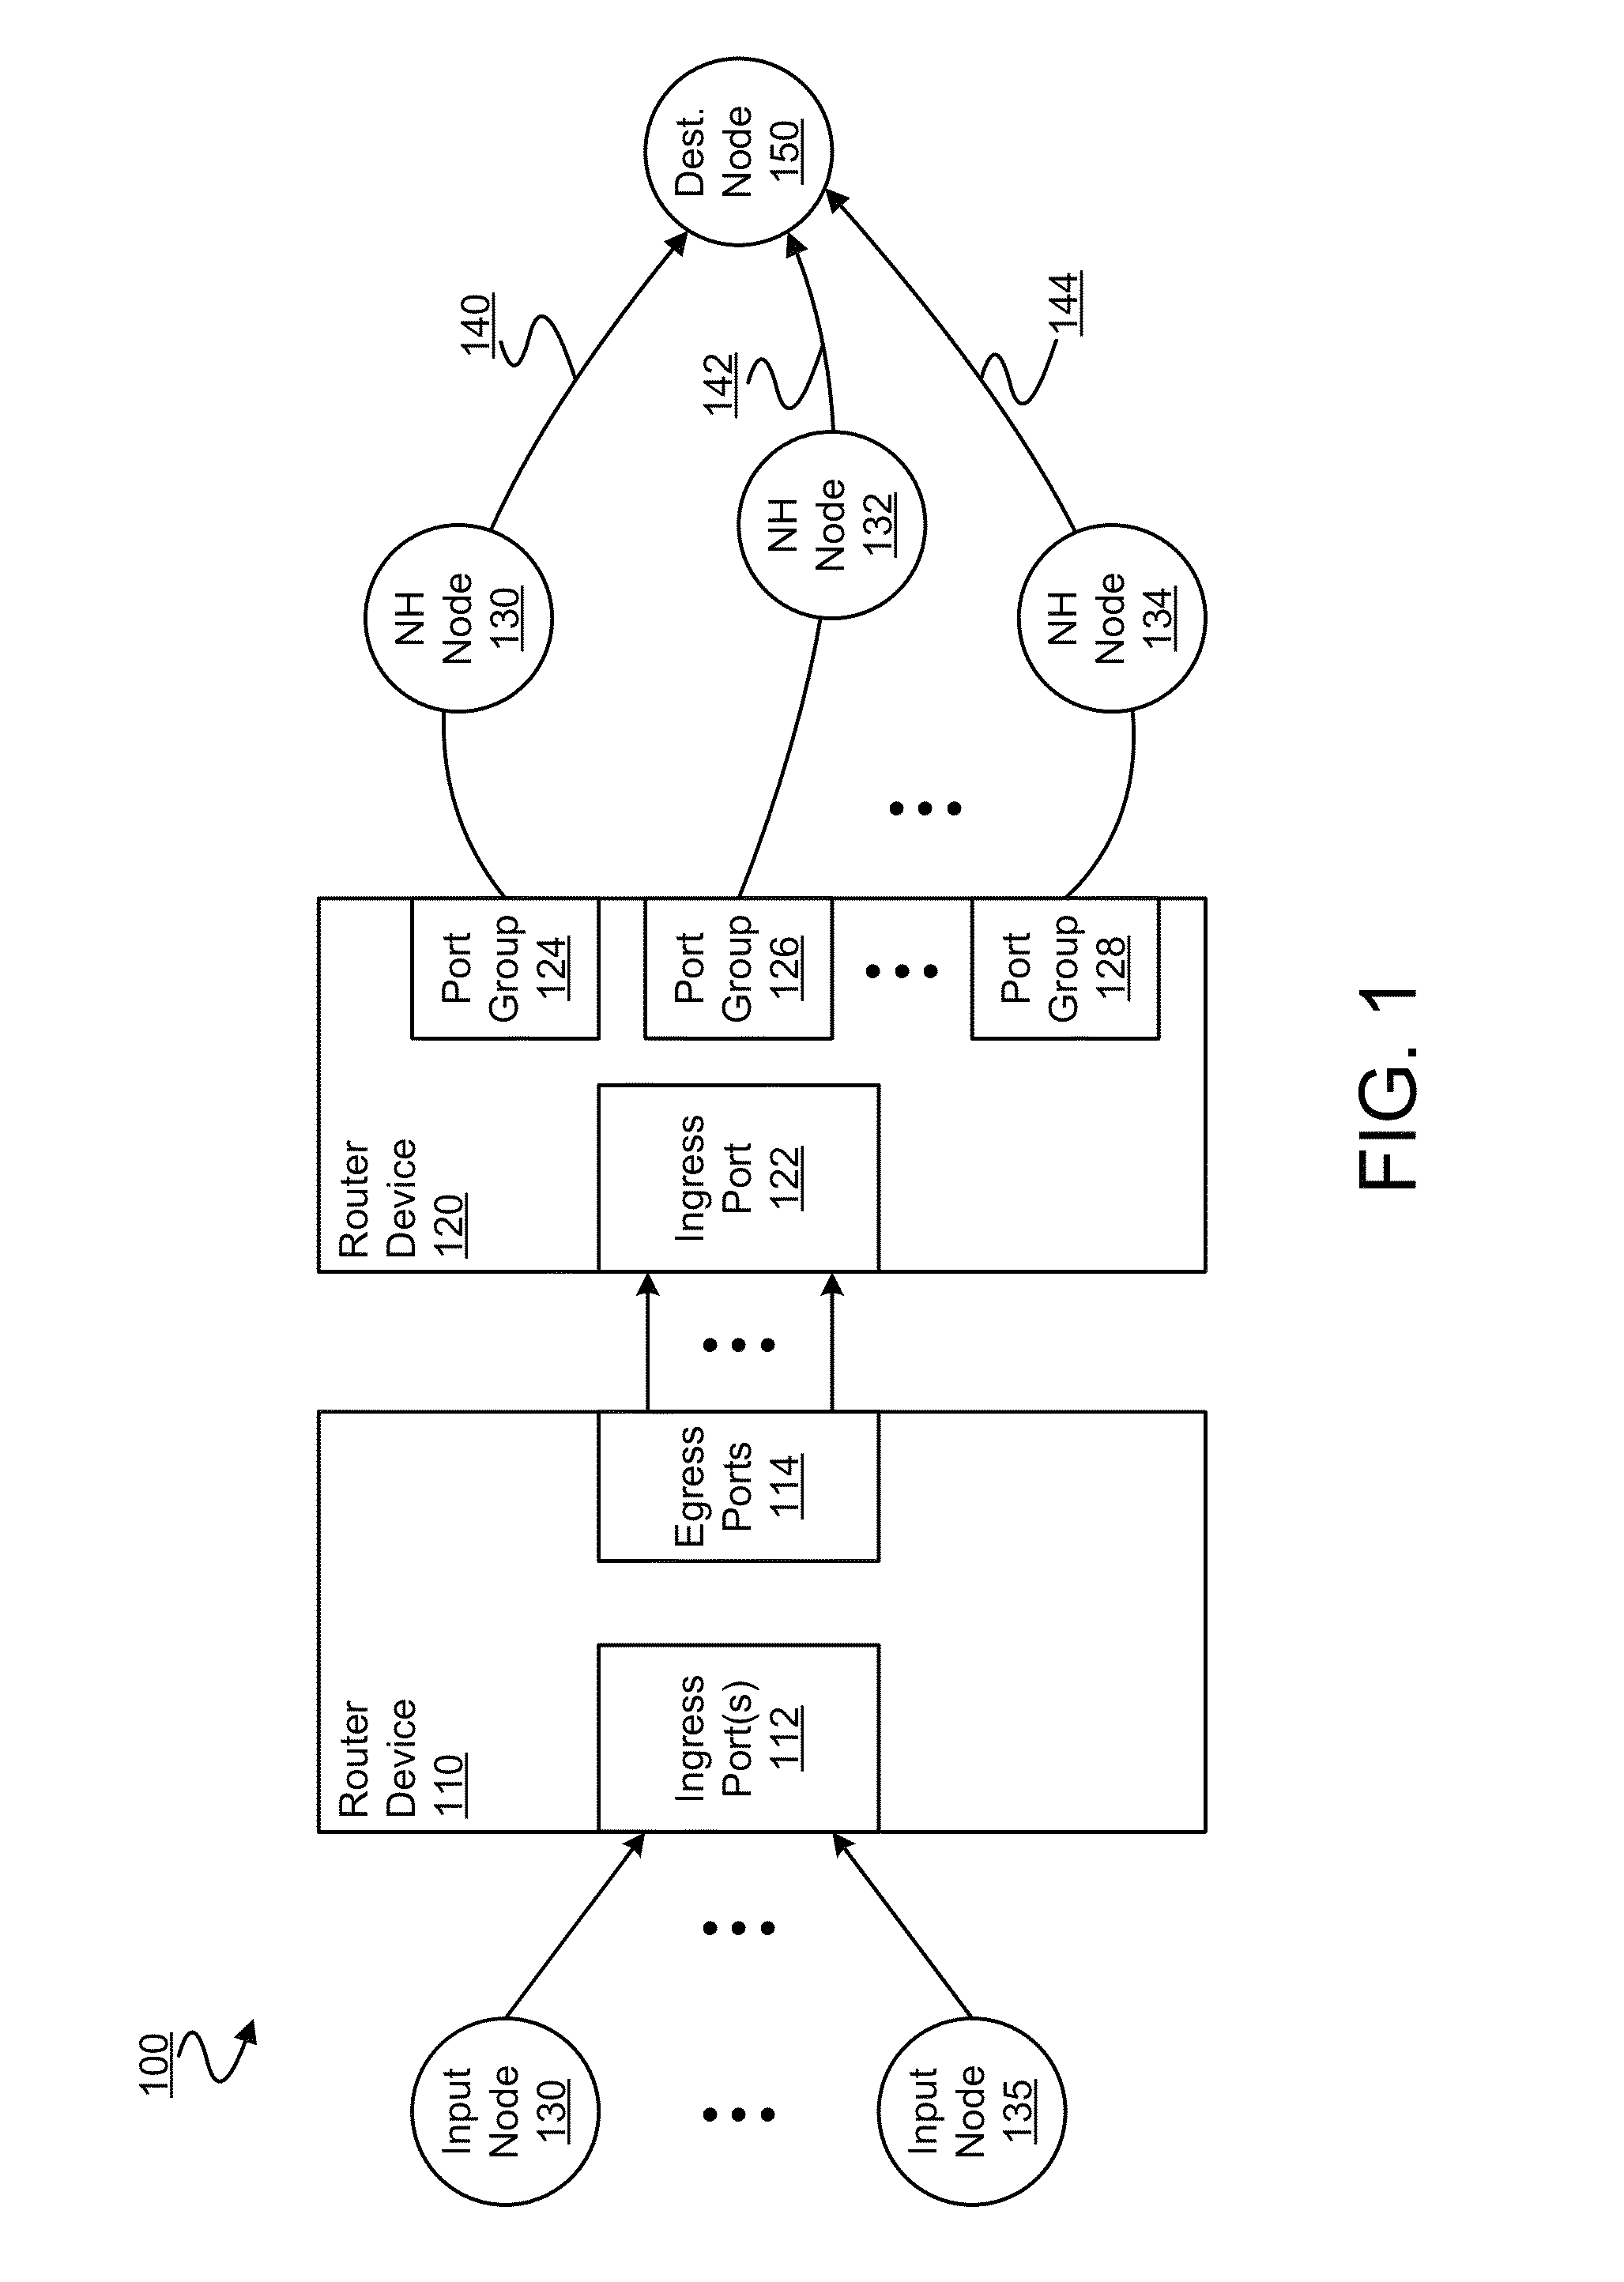 Providing routing information to support routing by port groups via corresponding network paths